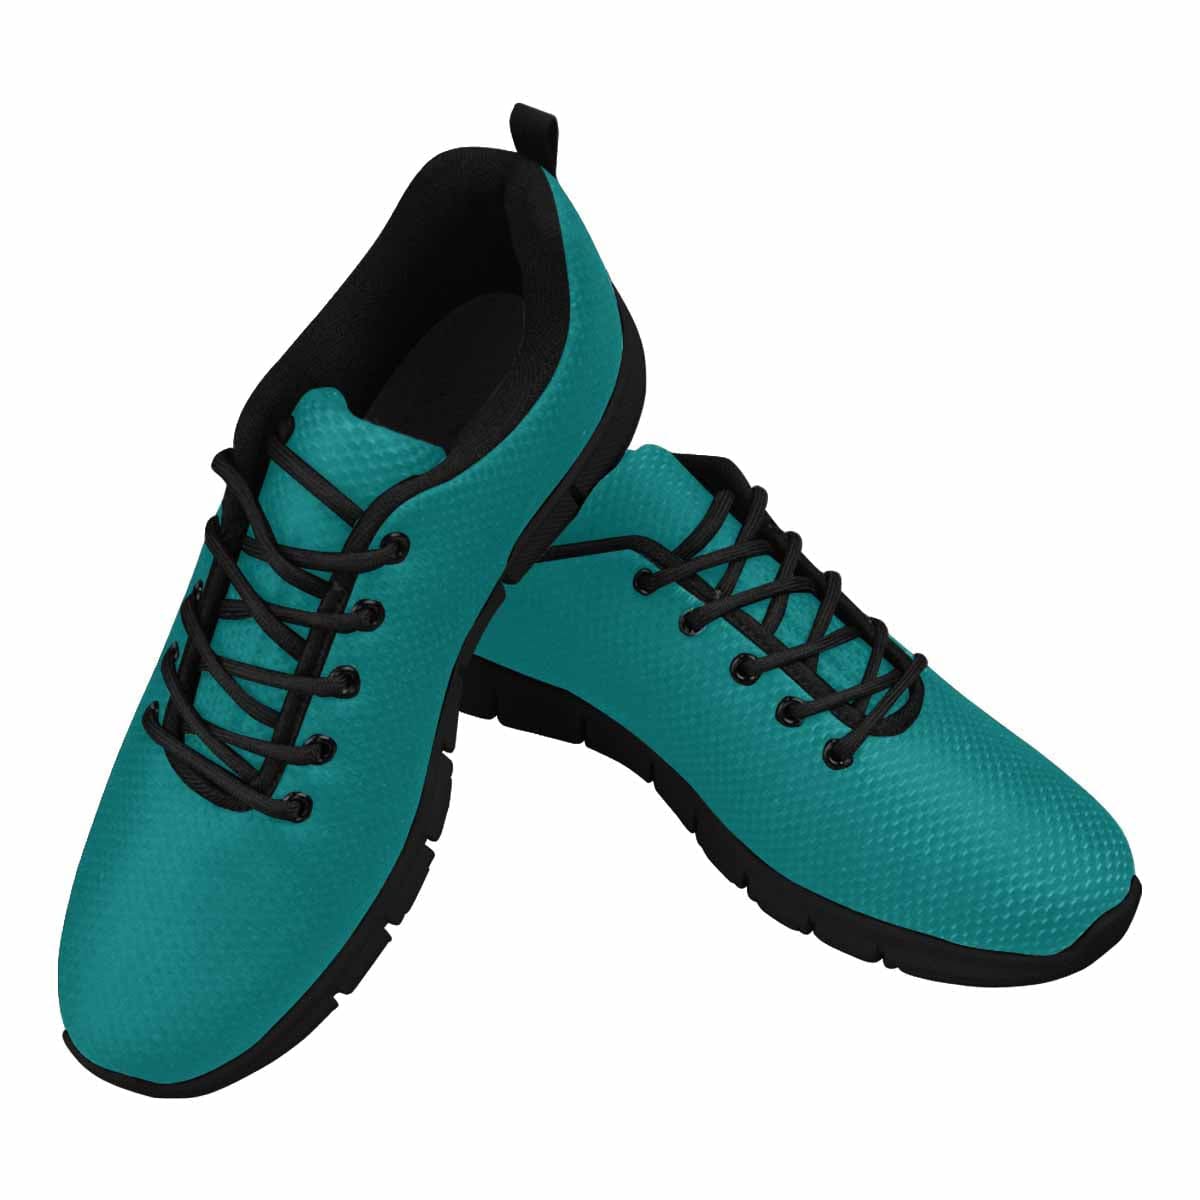 Sneakers For Men Dark Teal Green - Canvas Mesh Athletic Running Shoes - Mens